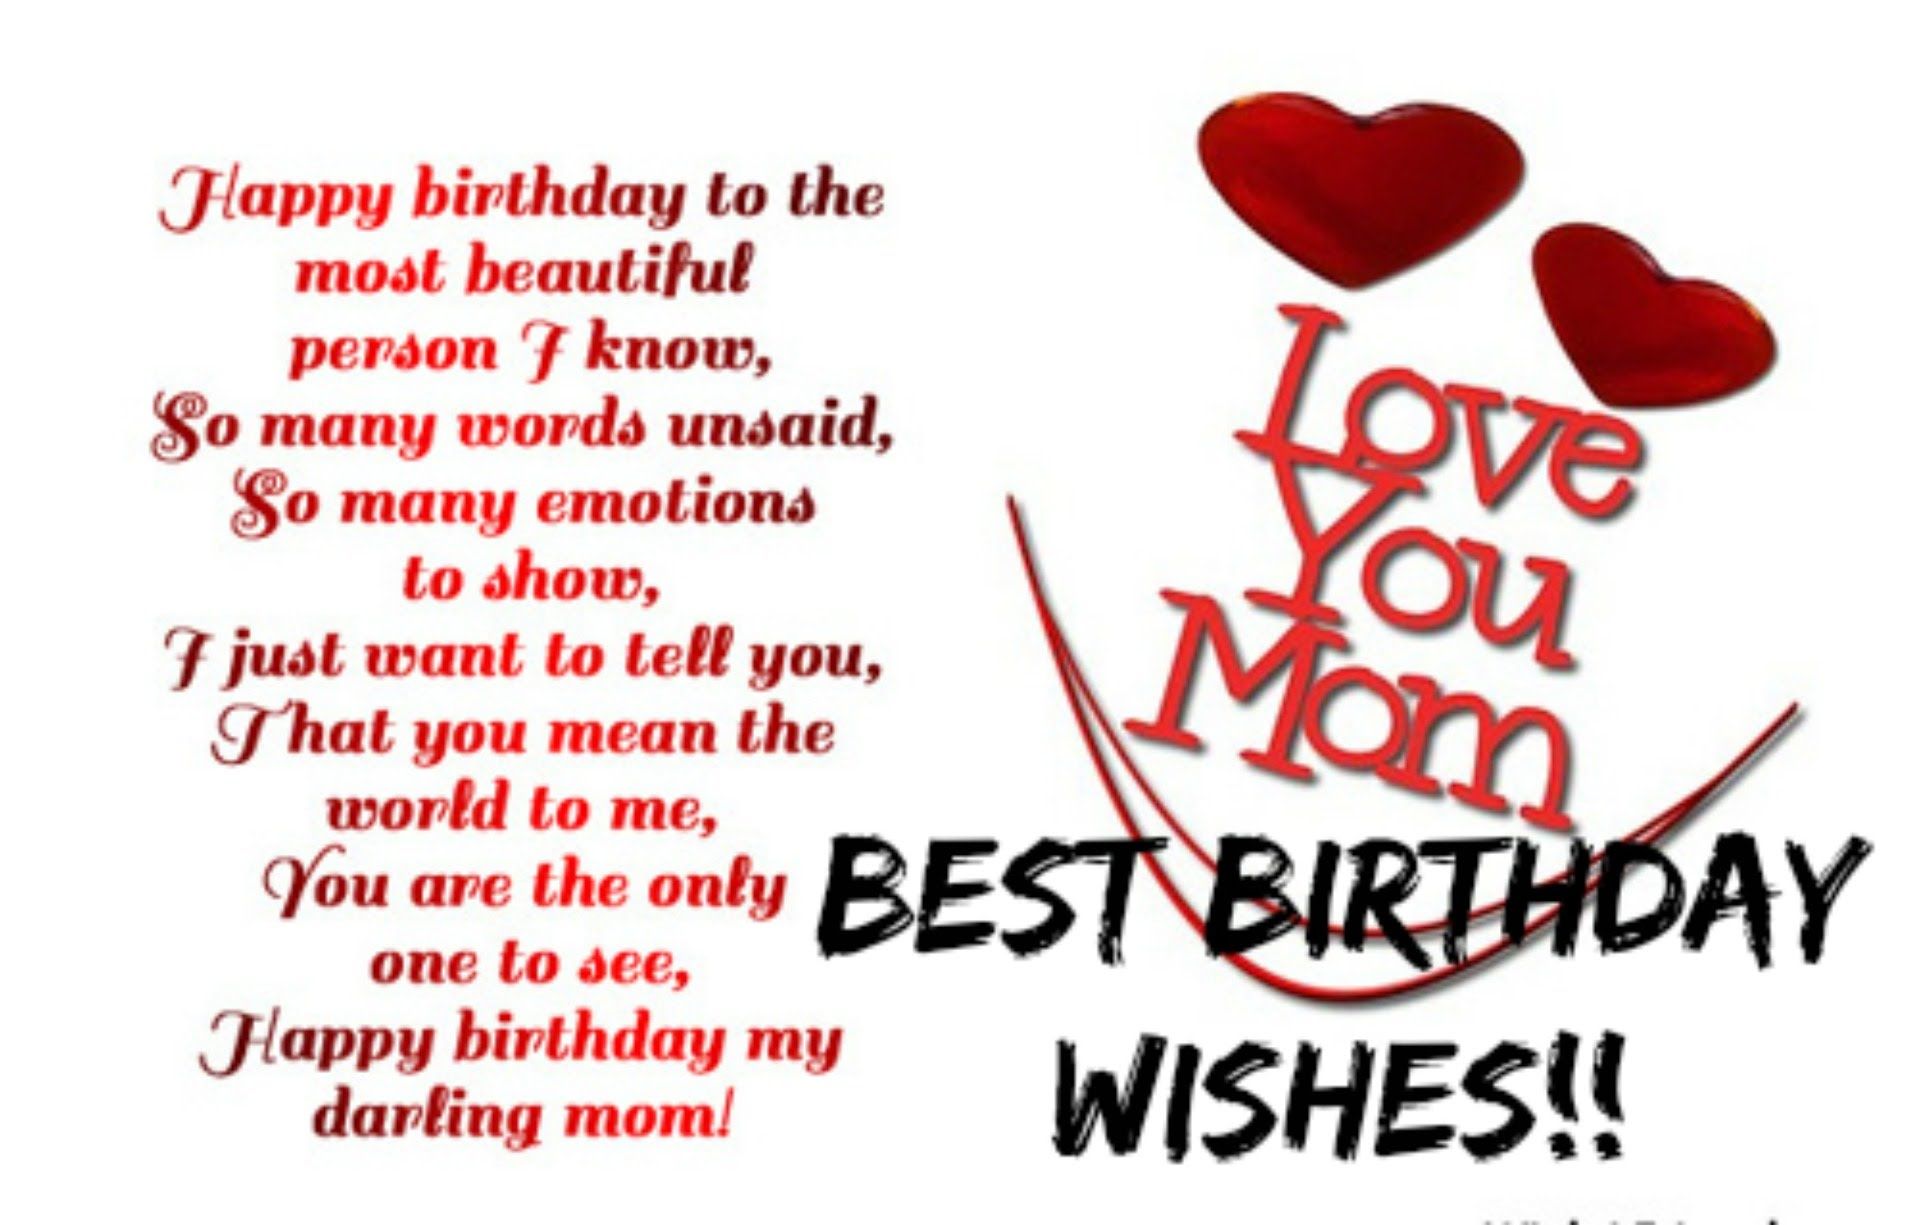 Birthday Wishes For Mother Imageto5animations.com